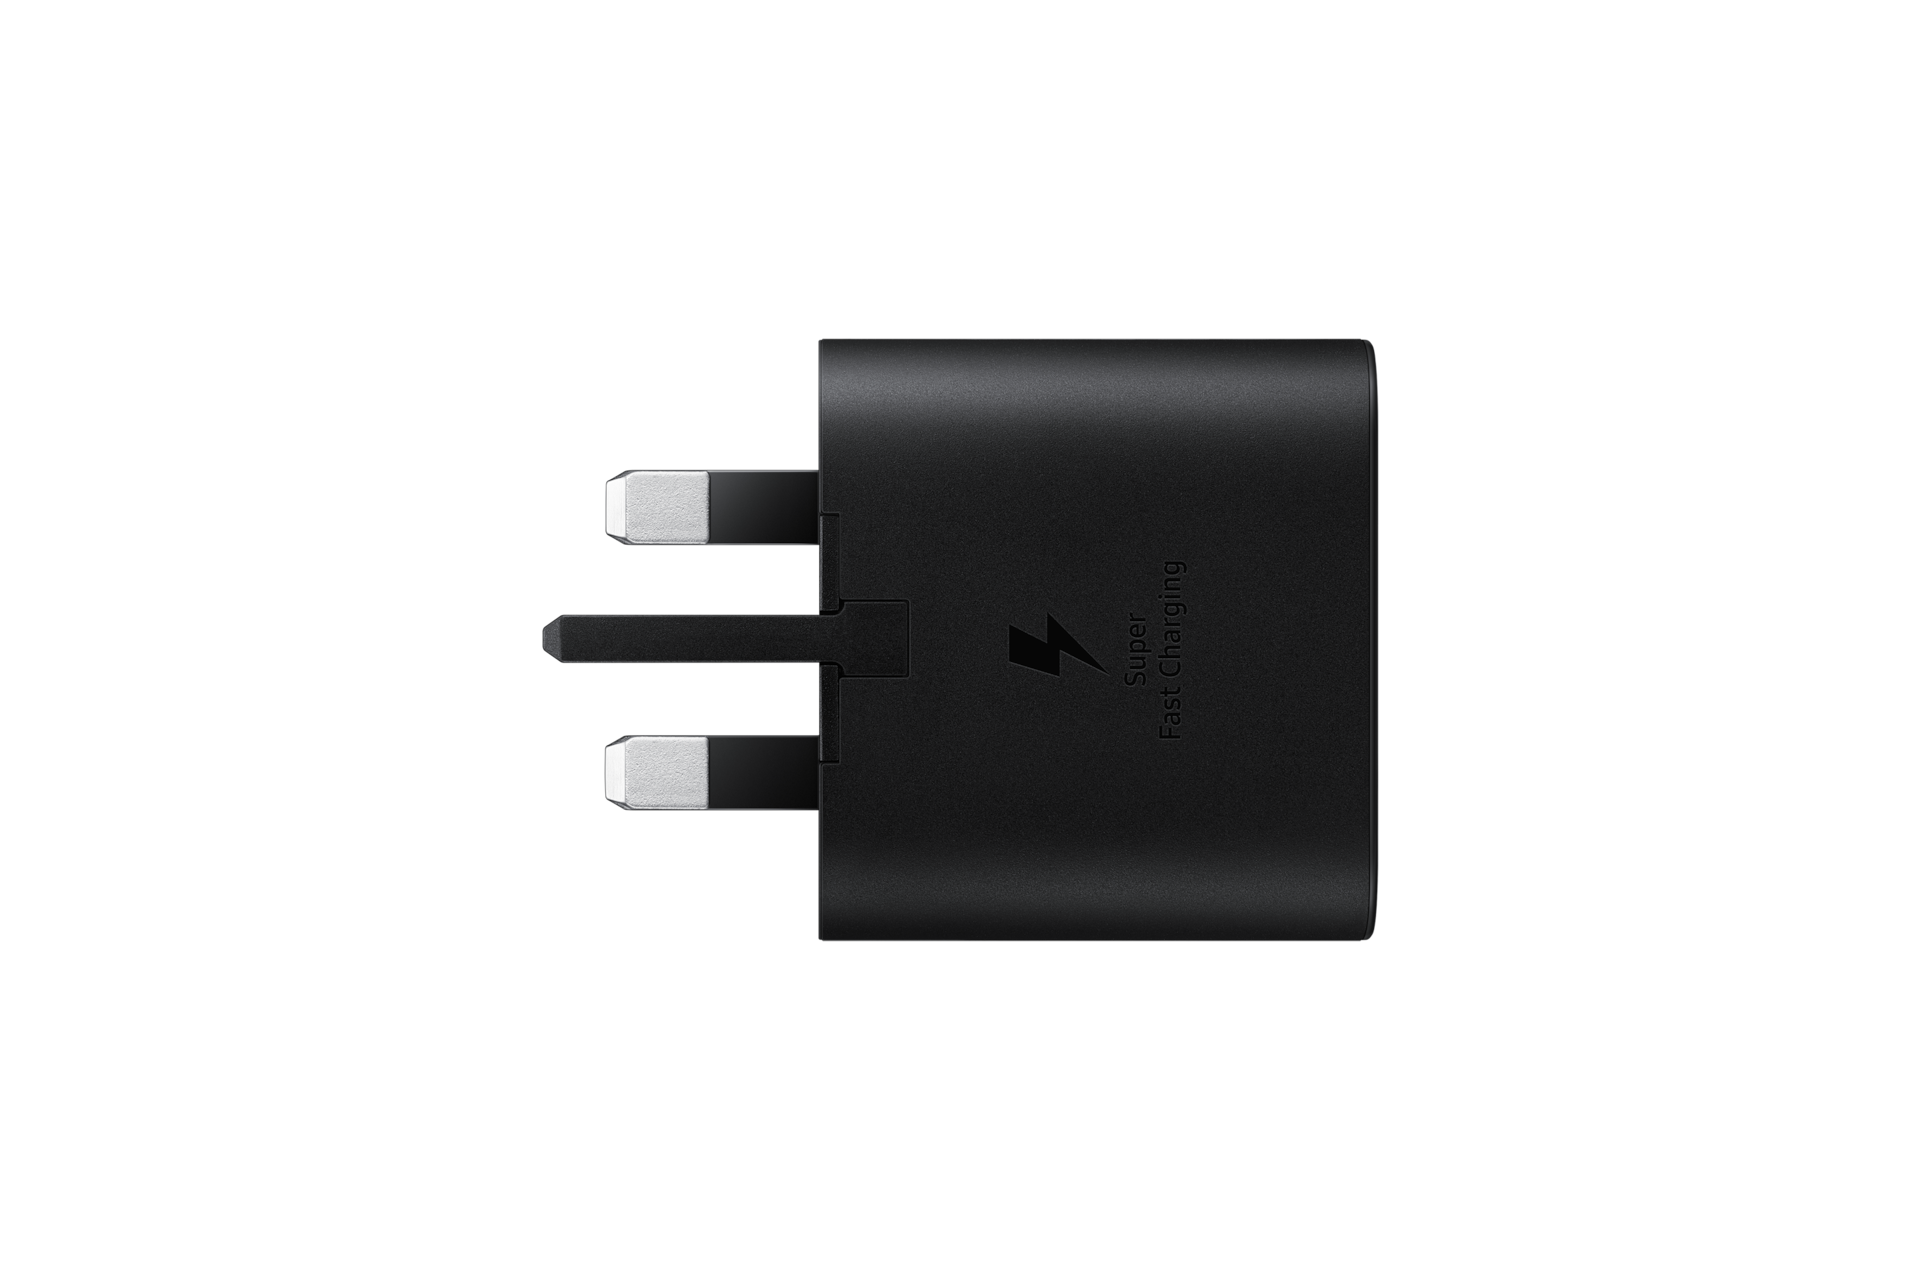 Buy Samsung Travel Adaptor for SuperFast Charging online, Up to 25W Super Fast Charging, USB-C compatible, USB Power Delivery (PD) 3.0.